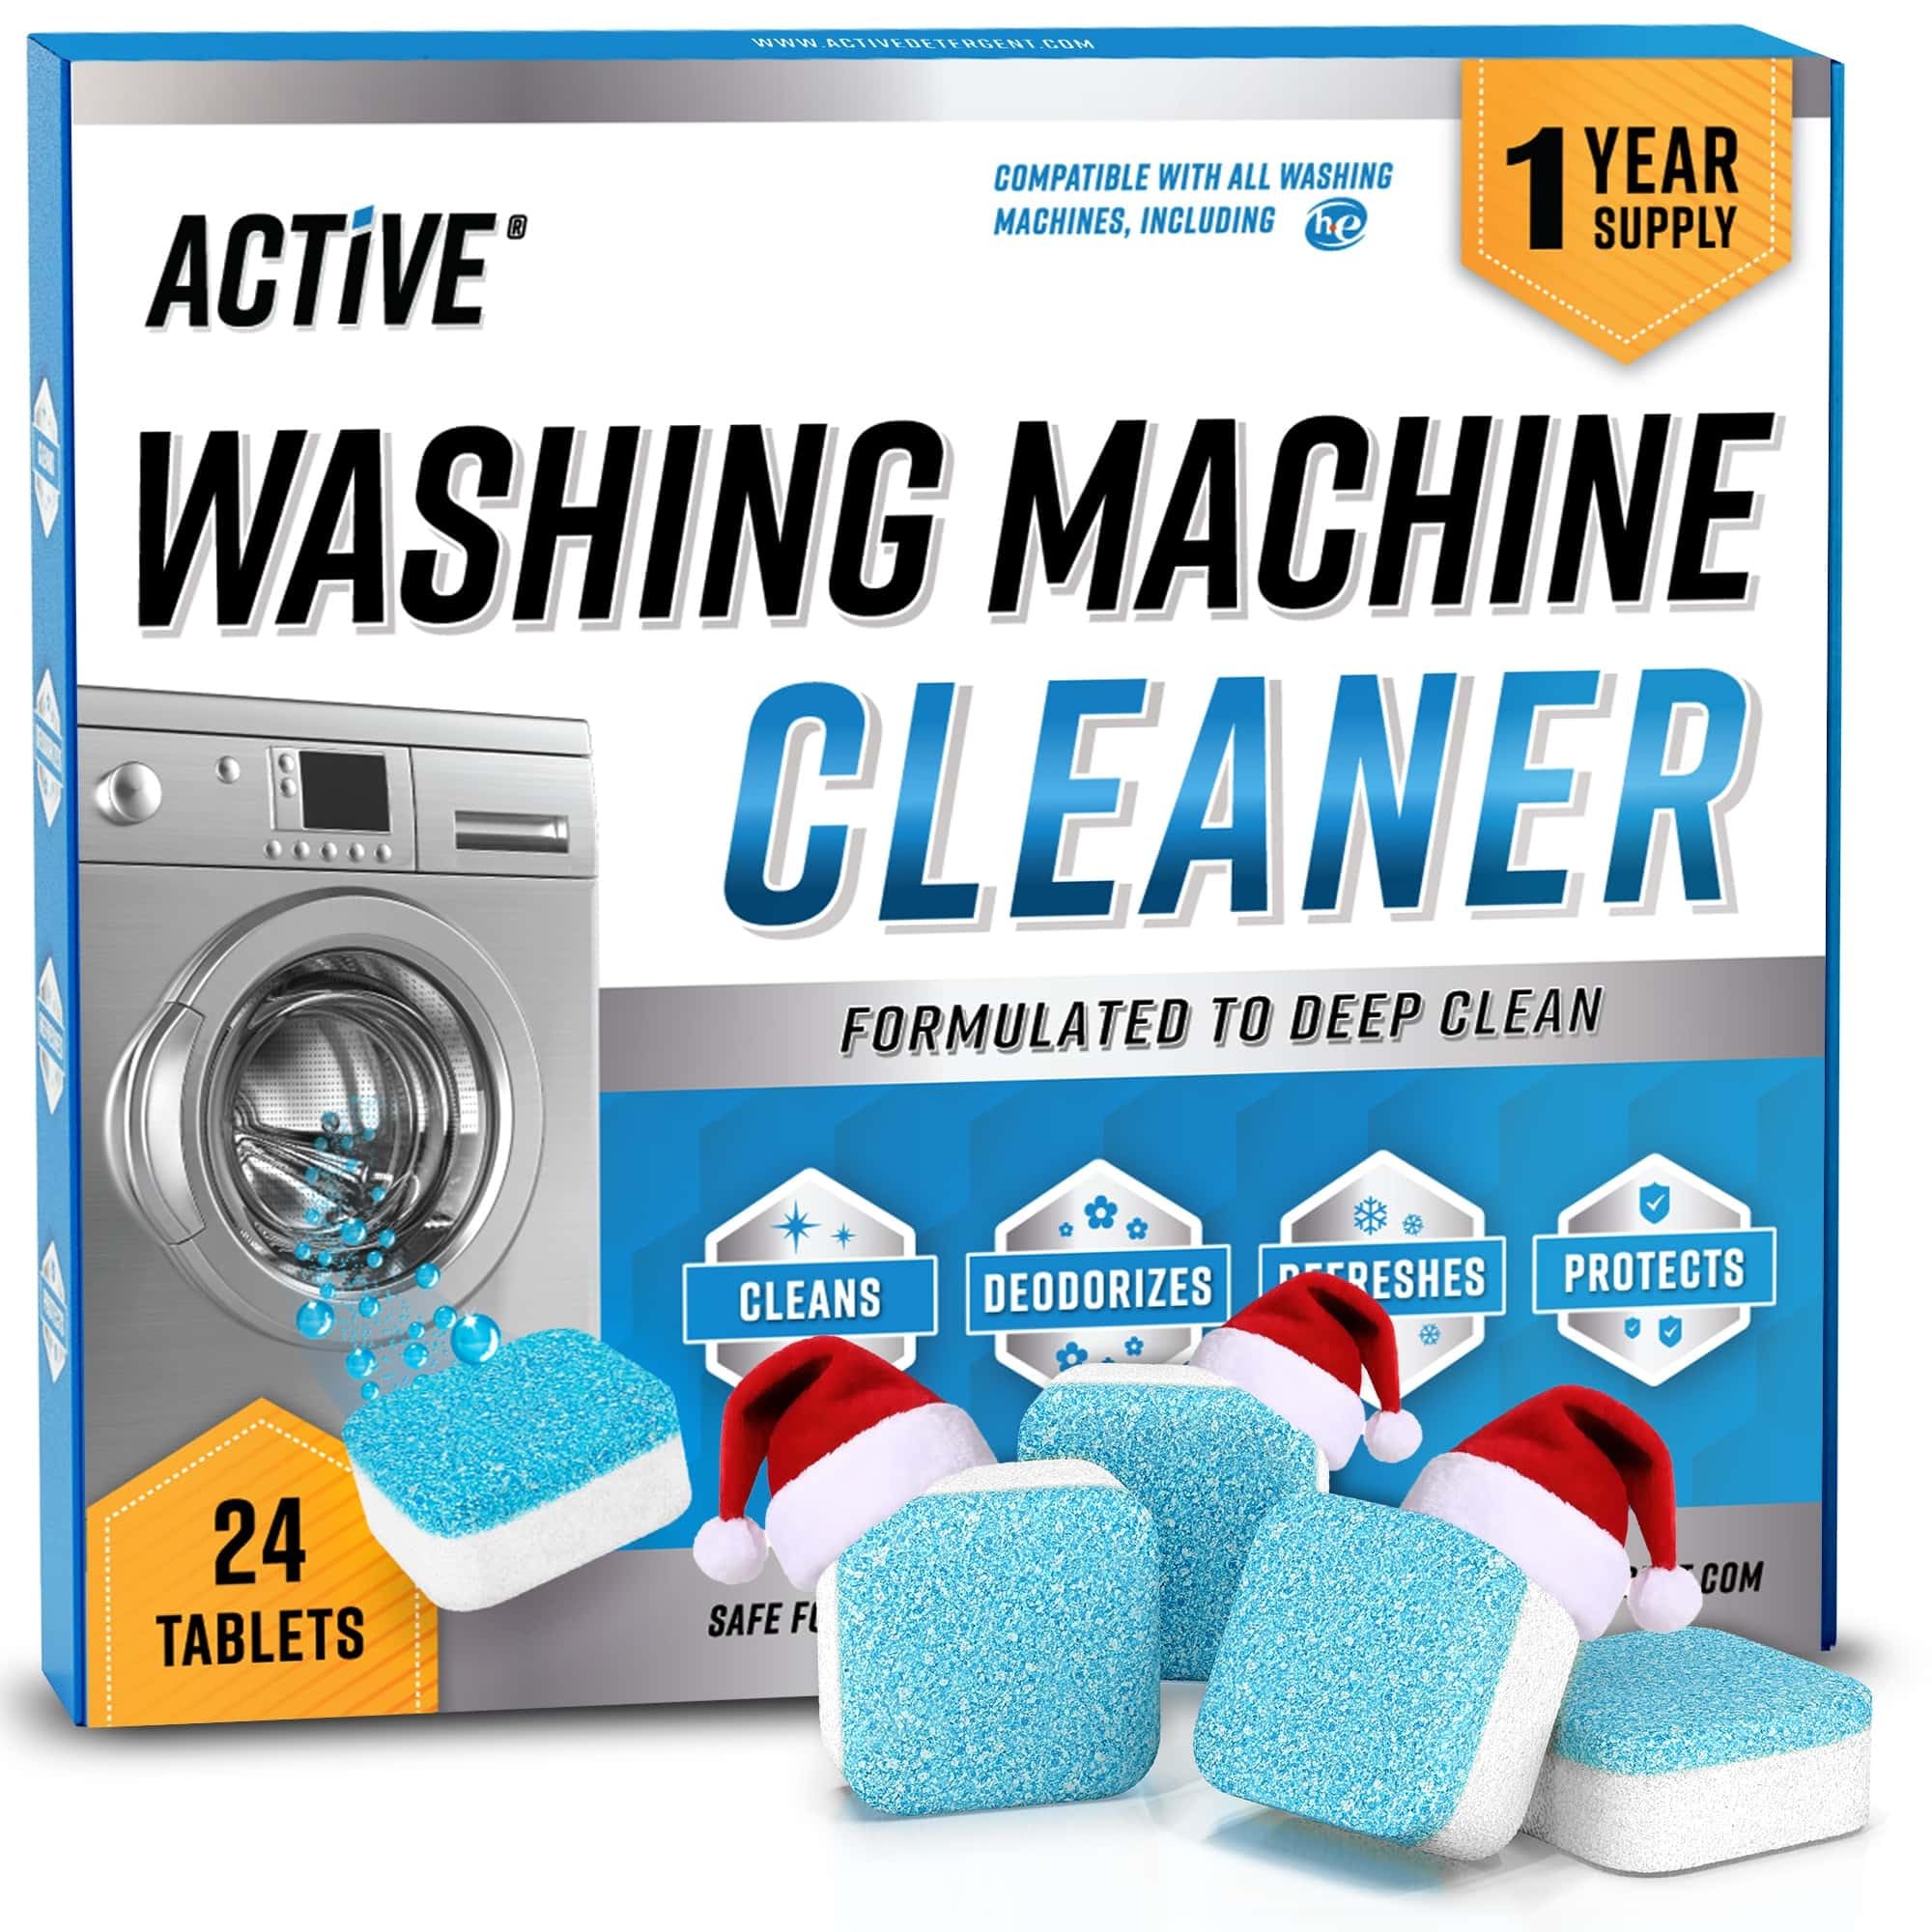 Washing Machine Cleaner Descaler 24 Pack - Deep Cleaning Tablets For HE Front Loader & Top Load Washer, Septic Safe Eco-Friendly Deodorizer, Clean Inside Drum And Laundry Tub Seal 12 Month Supply